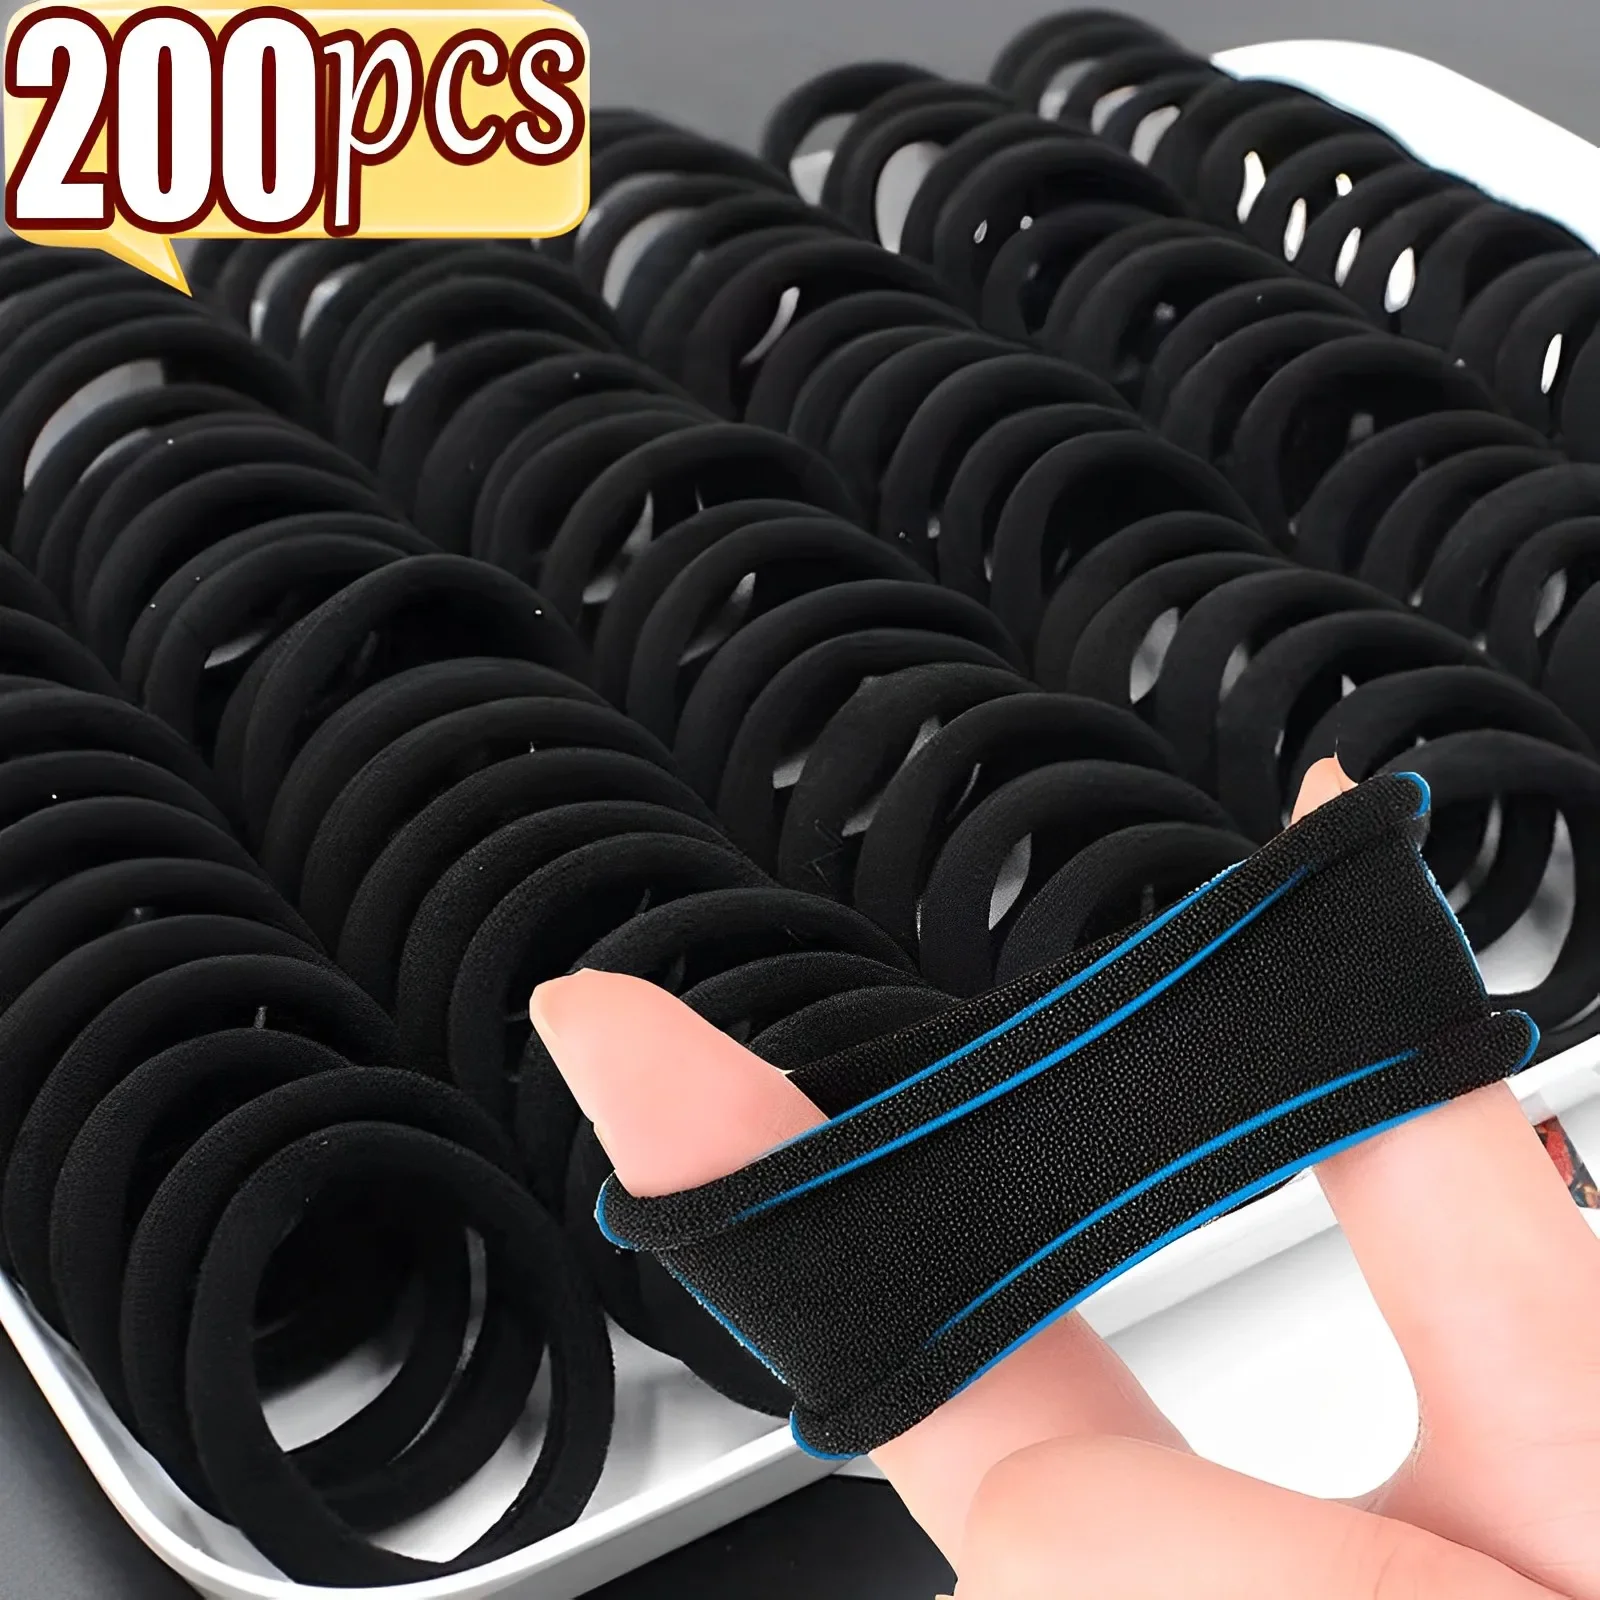 

10-200PCS High Elastic Hair Bands for Women Girls Black Hairband Rubber Ties Ponytail Holder Scrunchies Kids Hair Accessories